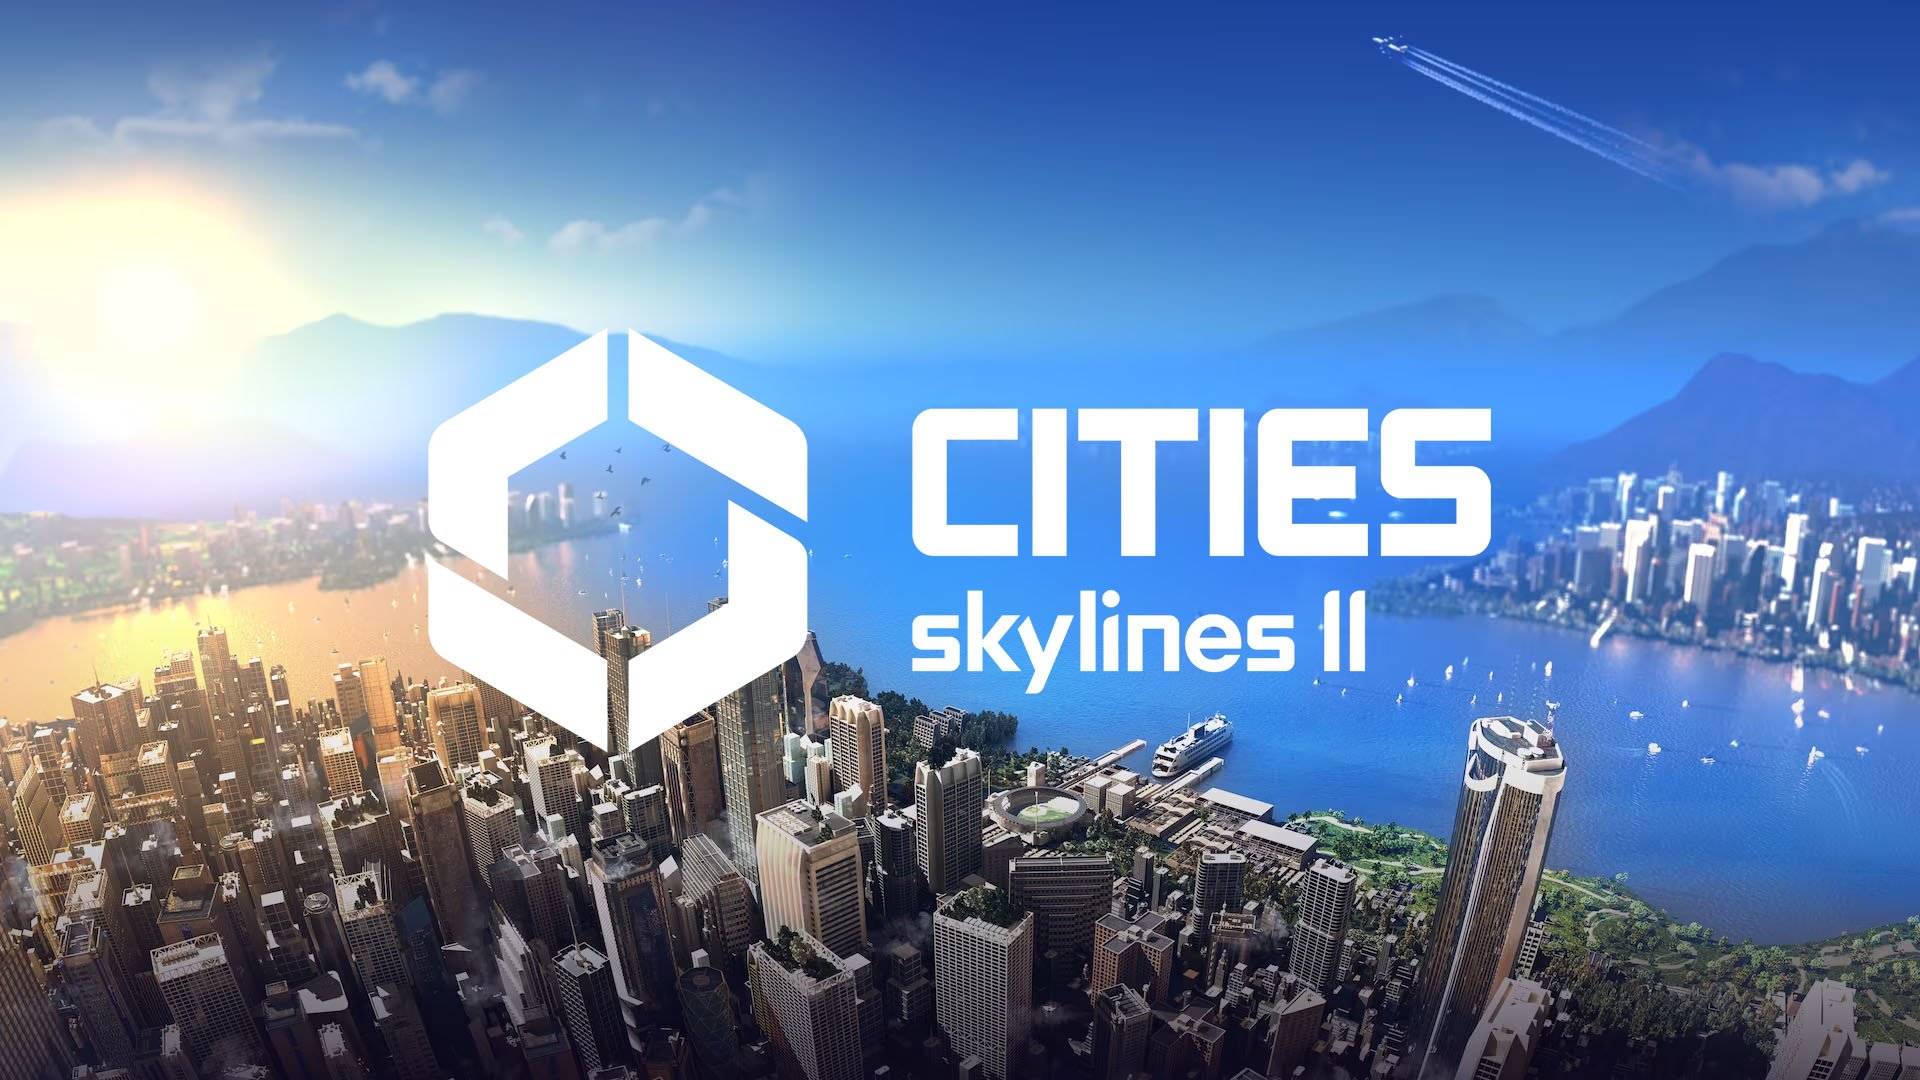 Cities: Skylines II has been announced for PS5, Xbox Series X and PC